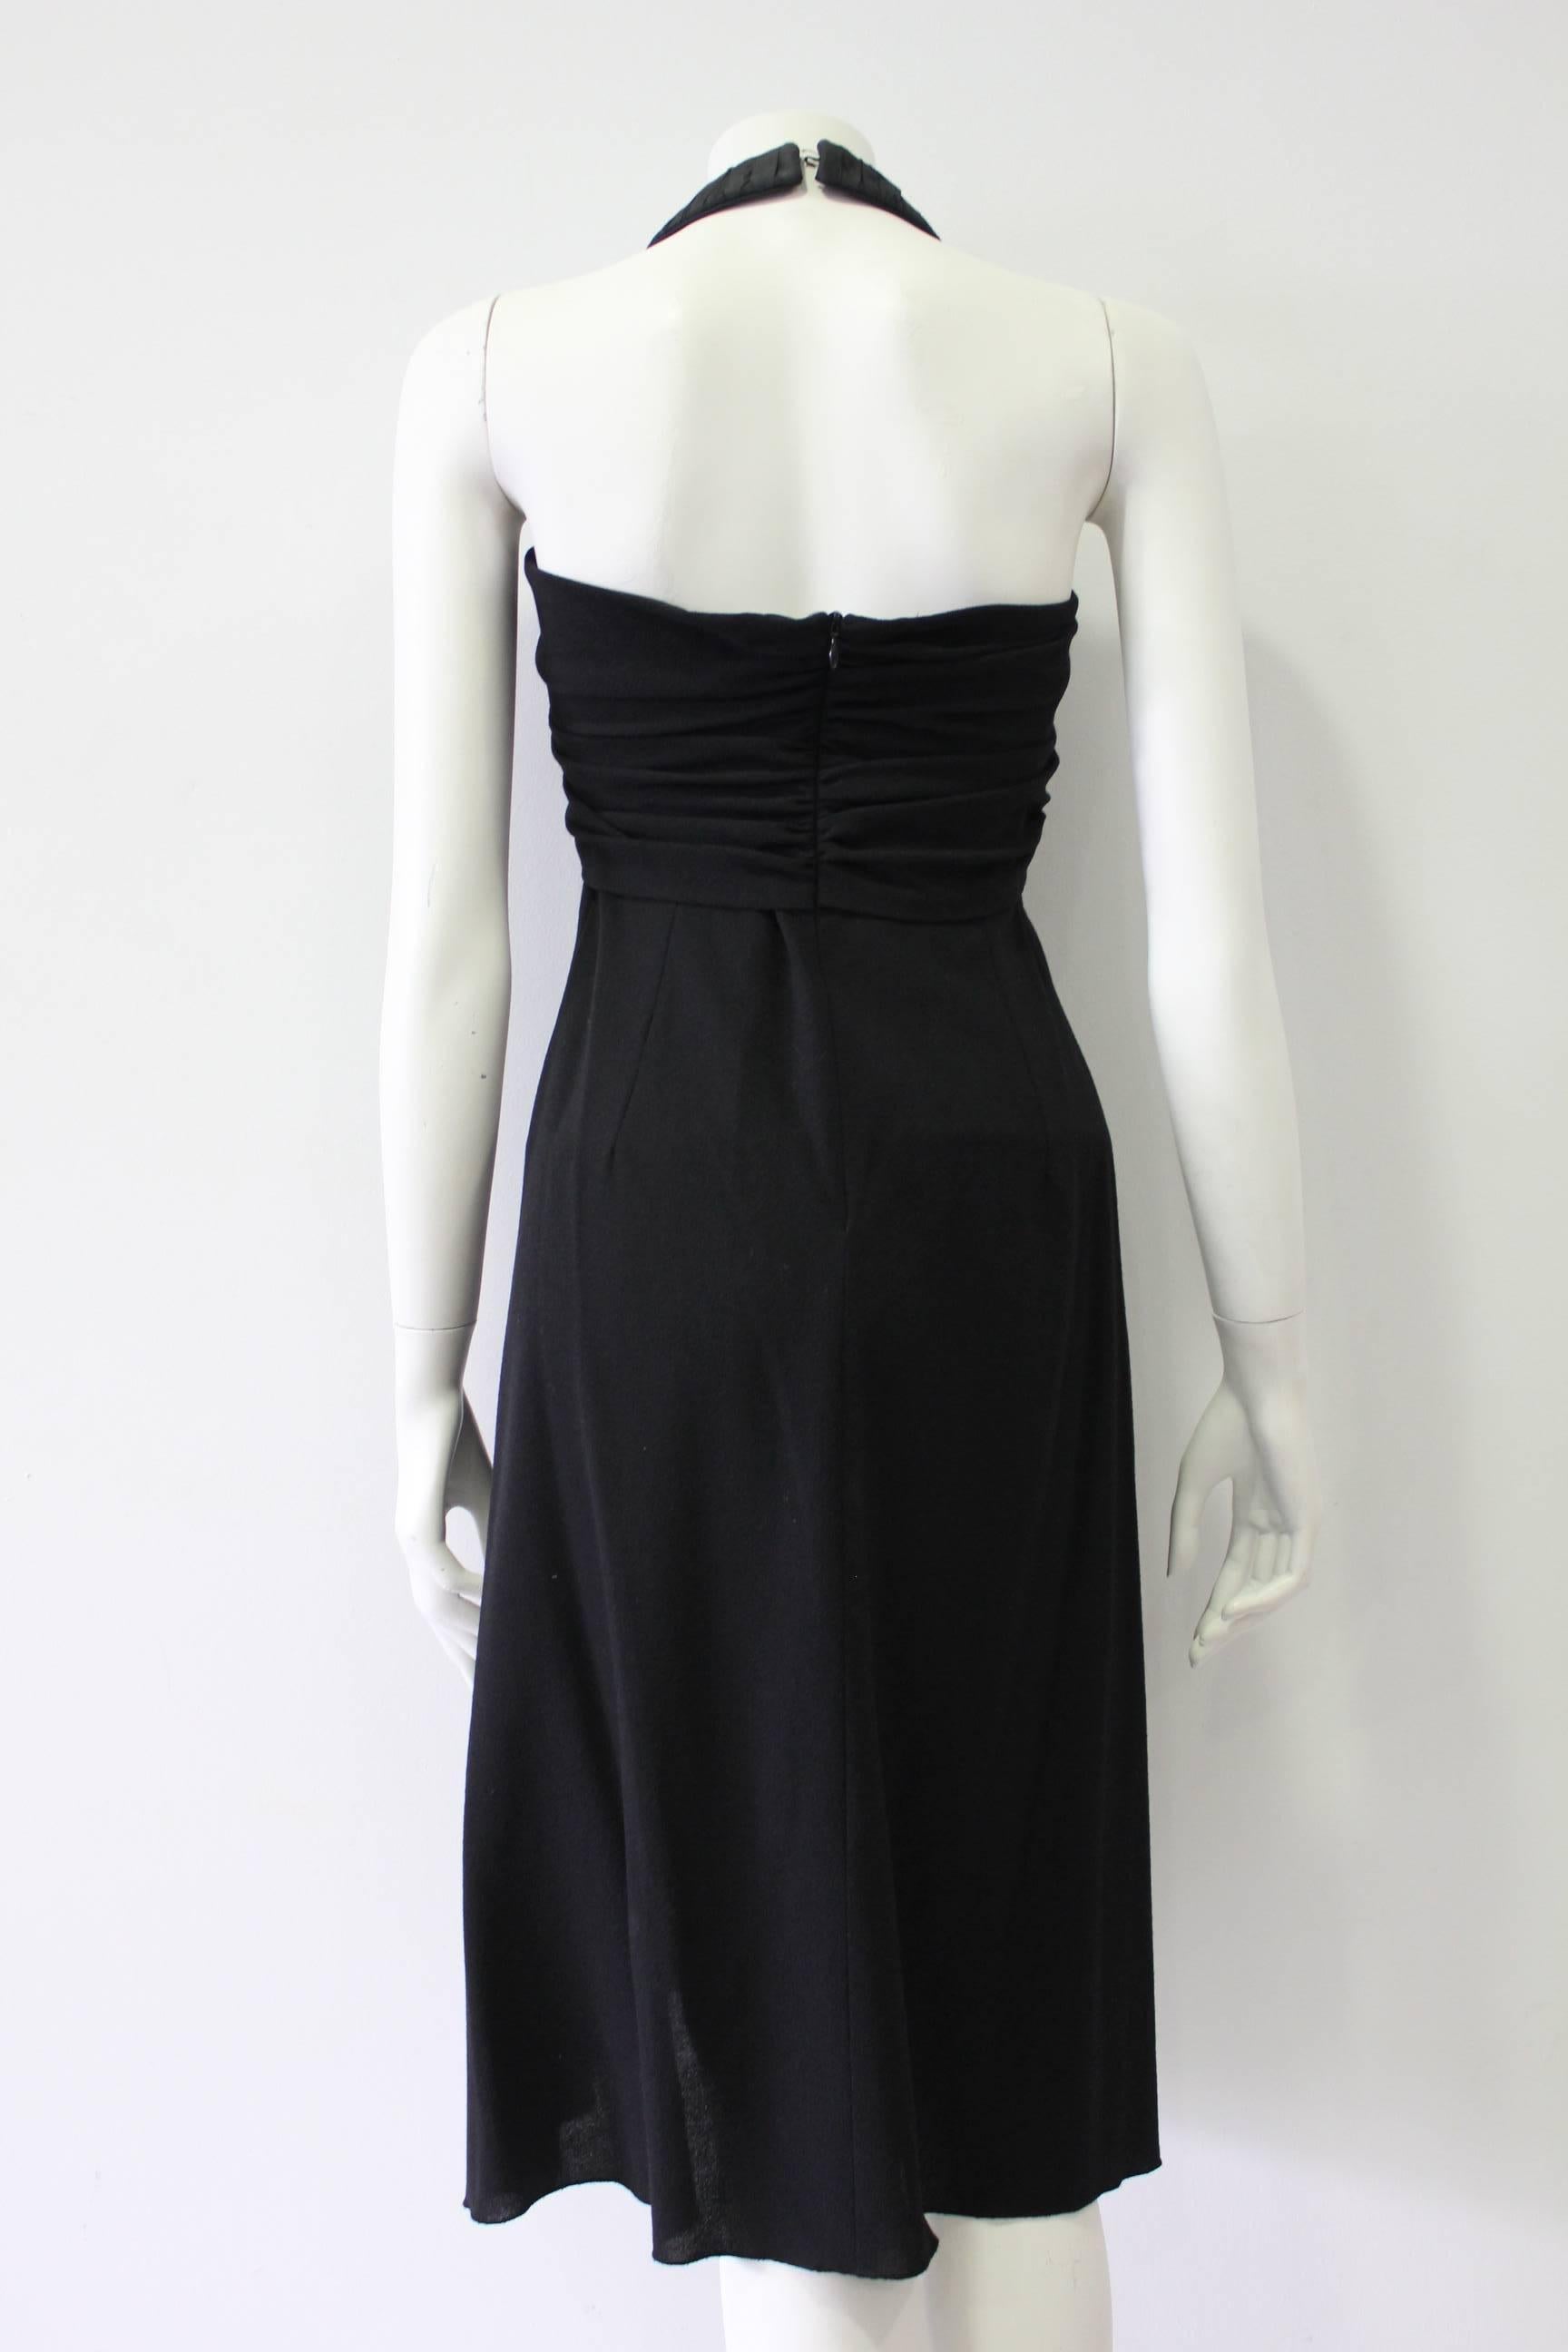 Very Rare Cesare Fabbri Three Discs Halter Dress In Excellent Condition For Sale In Athens, Agia Paraskevi